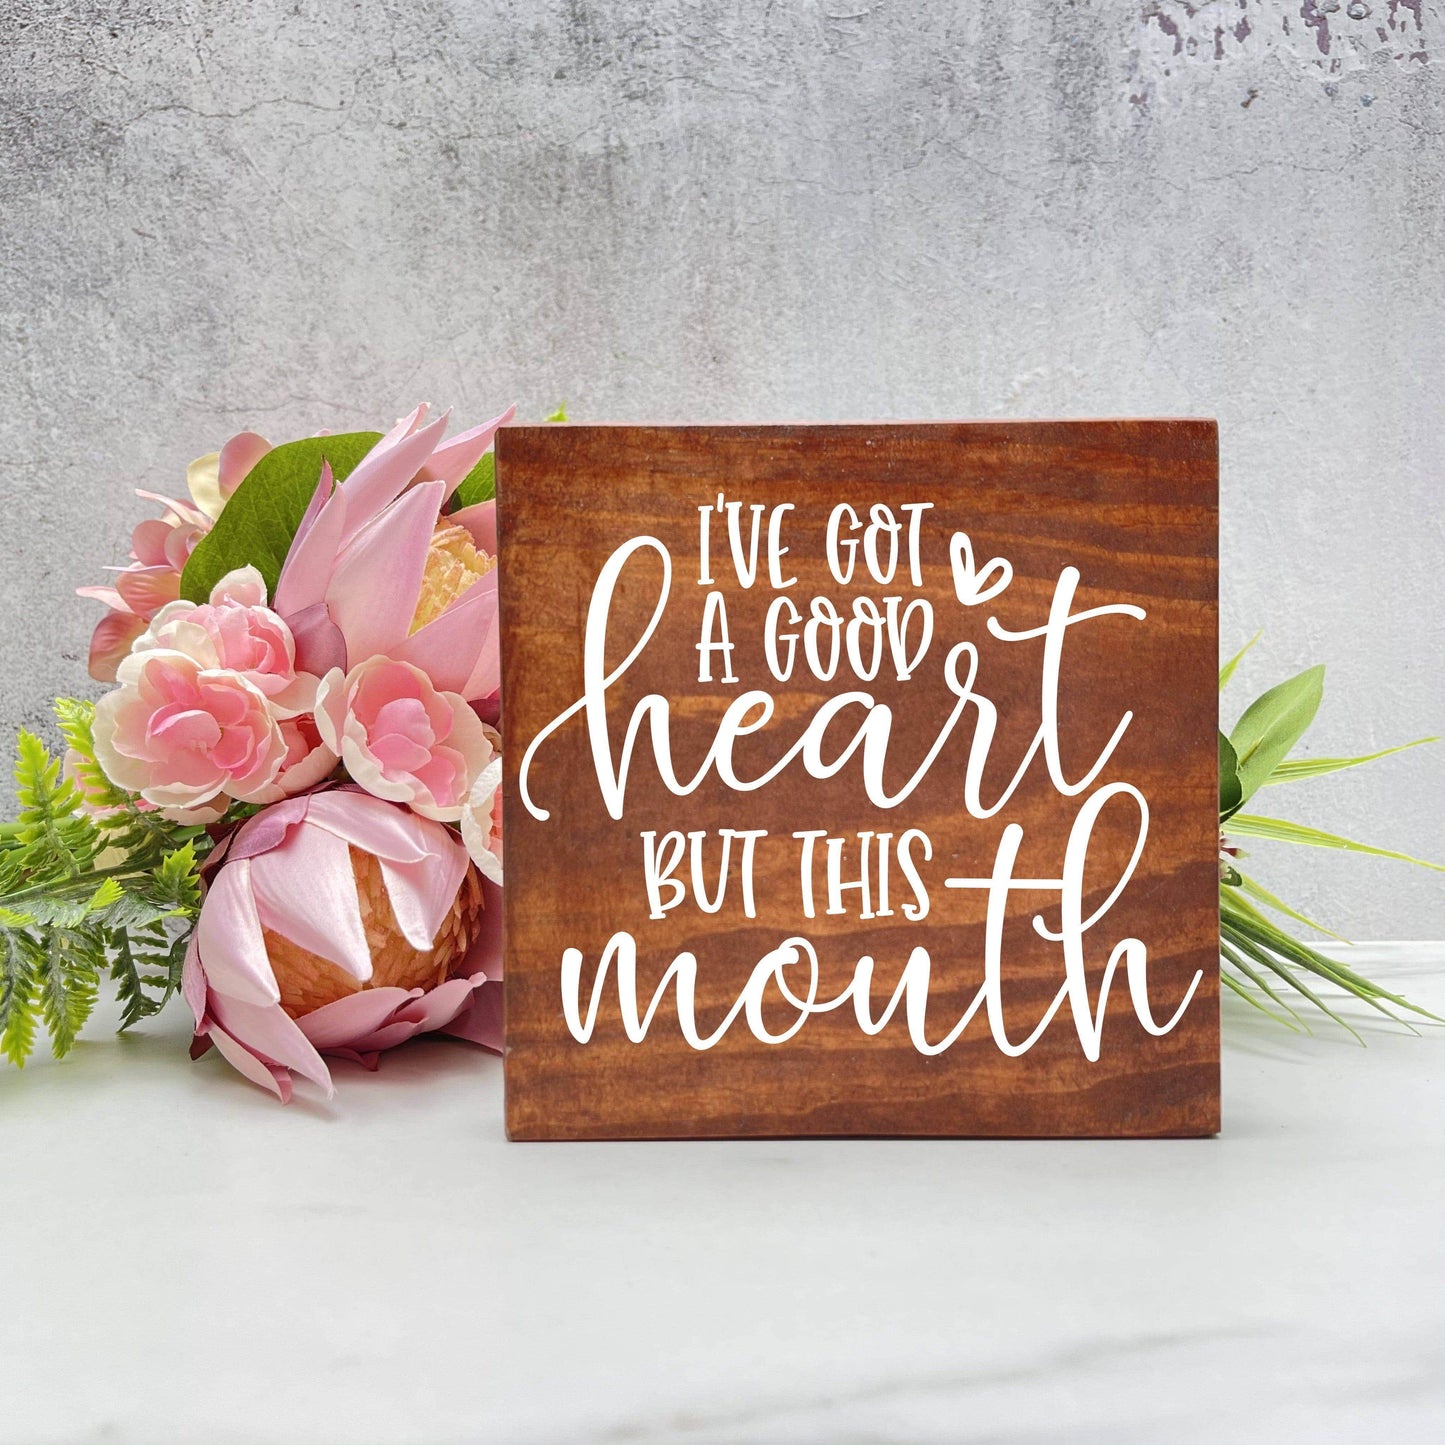 I've got a good Heart, But this Mouth wood sign, quote sign, rustic decor, home decor